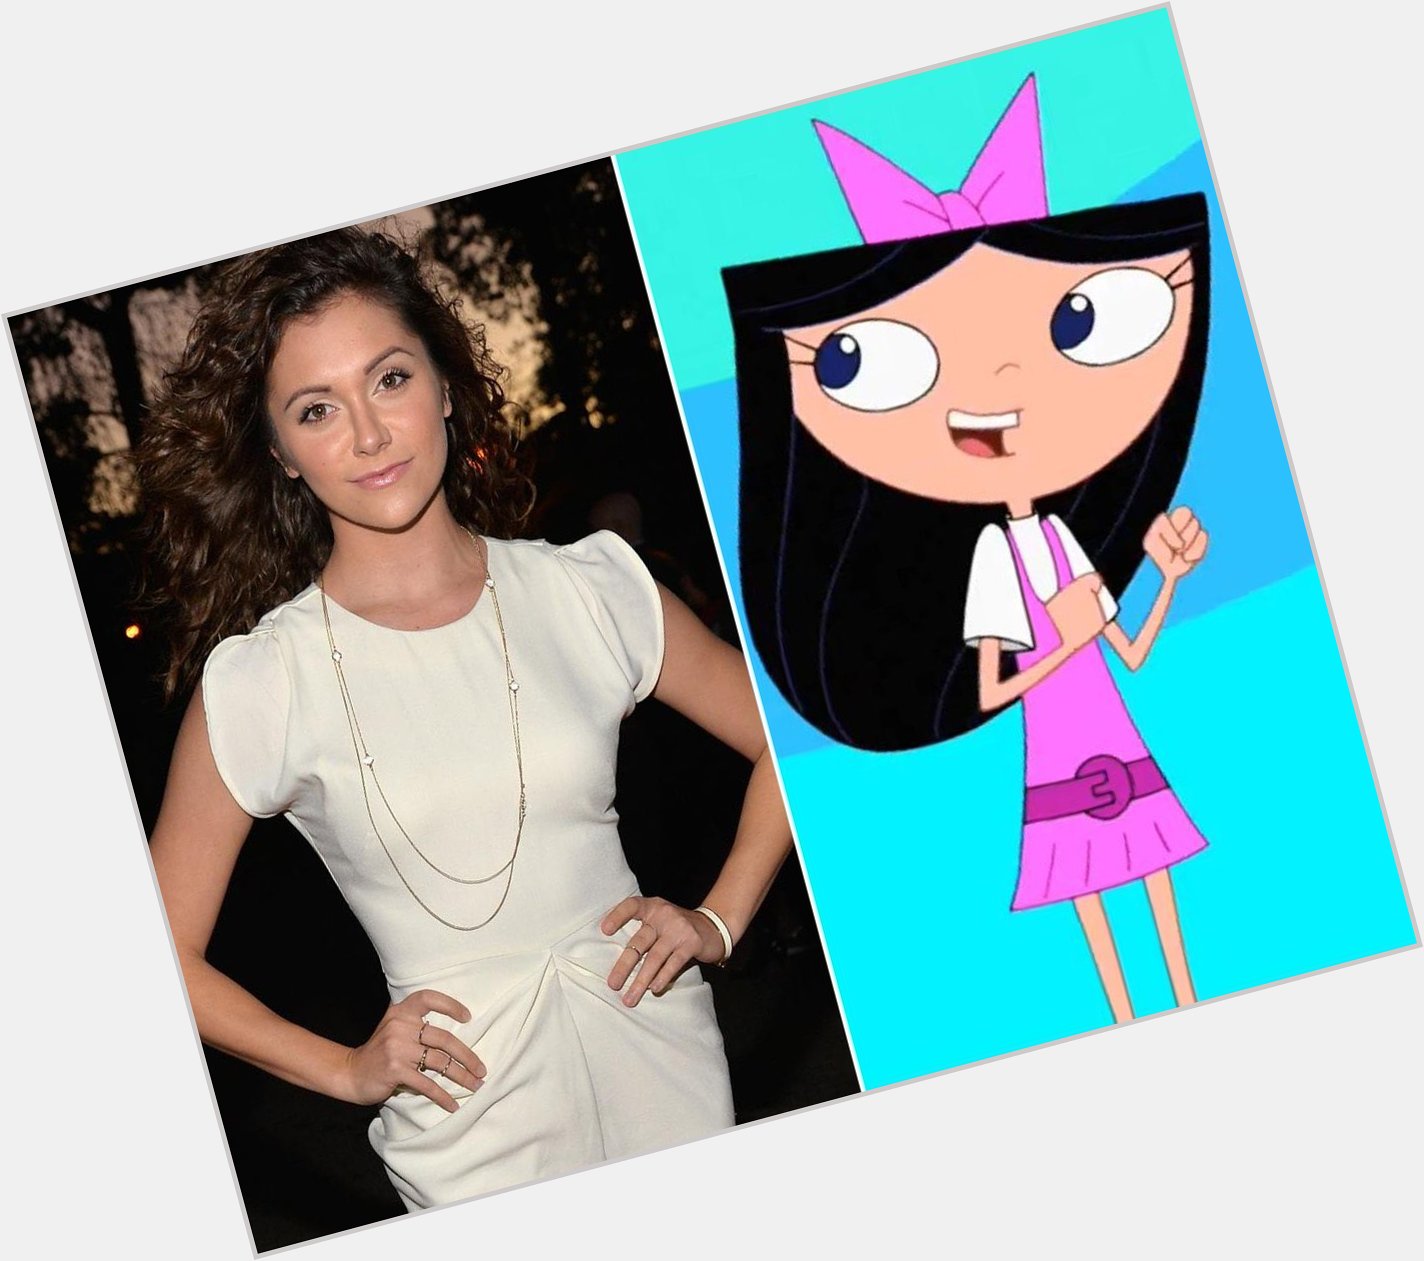 Happy 25th Birthday to Alyson Stoner! The voice of Isabella in Phineas and Ferb. 